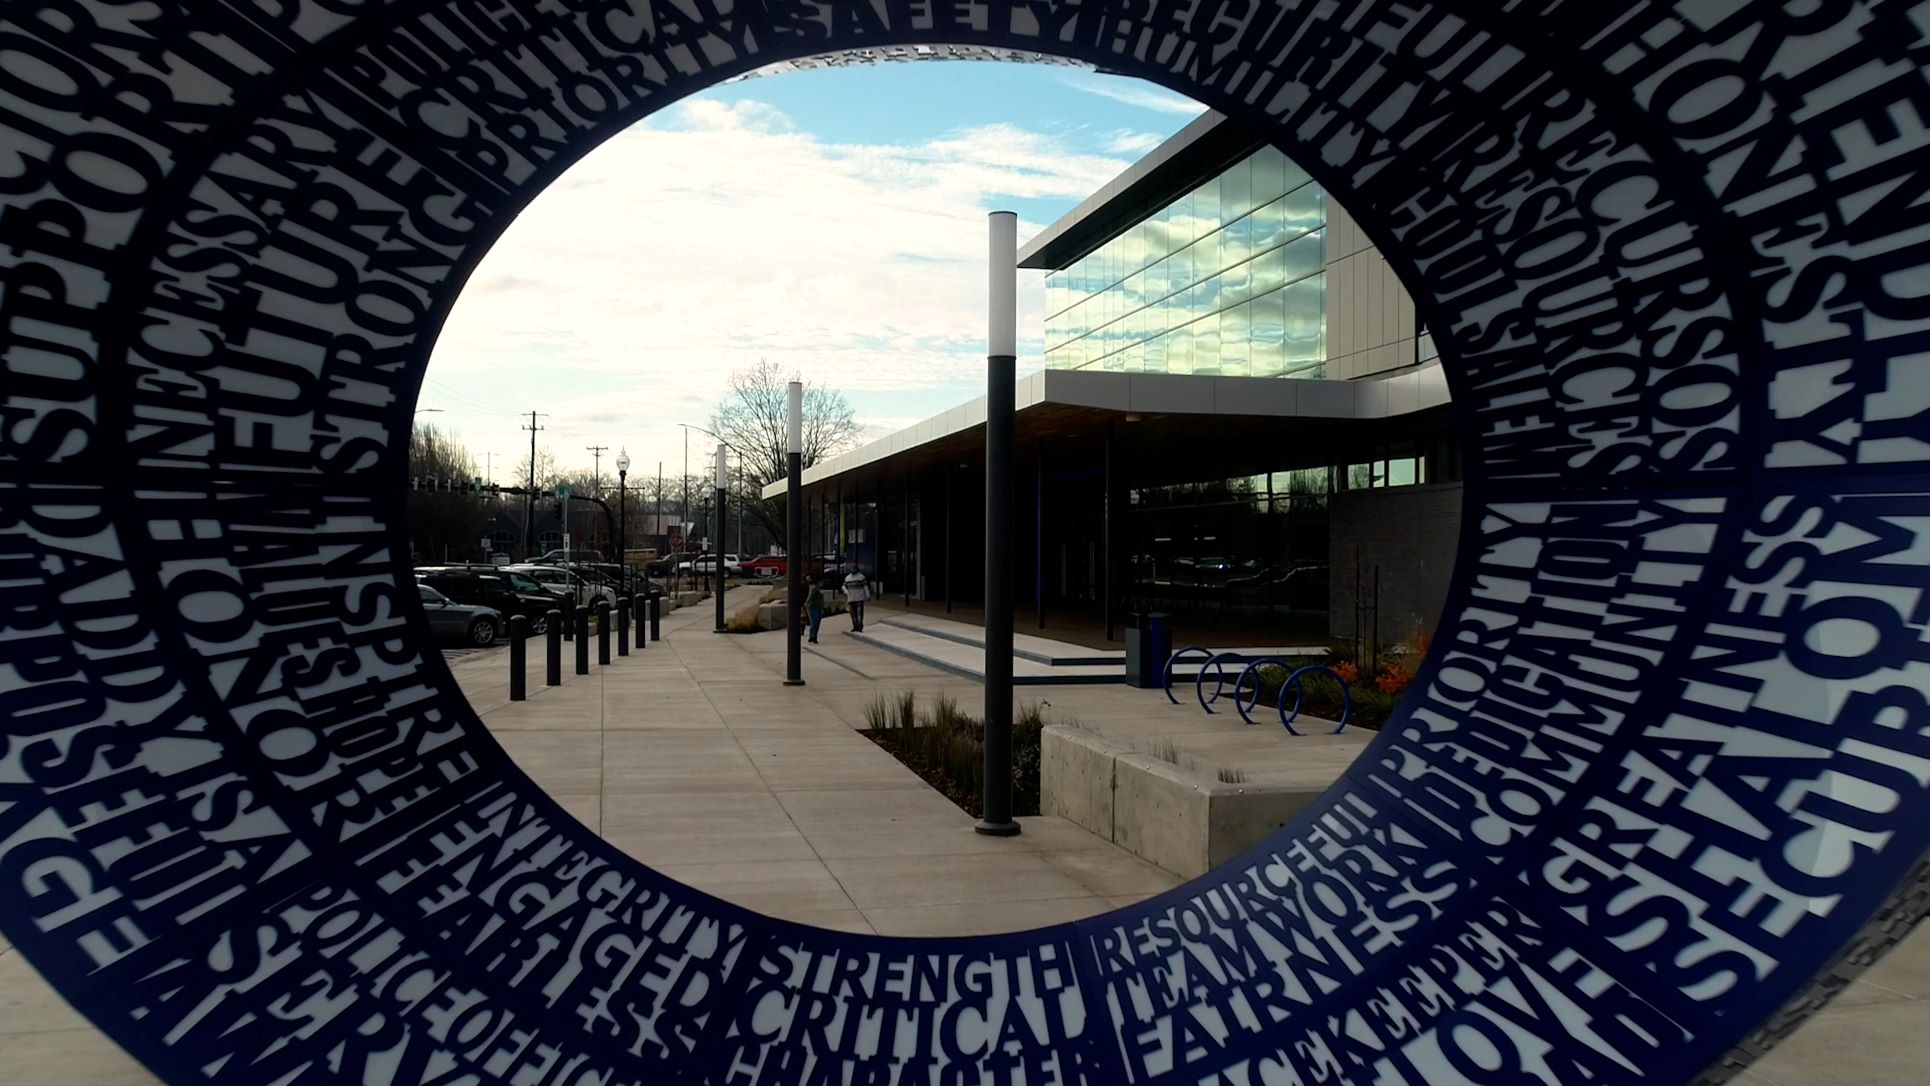 Looking through a donut shaped art sculpture outside a police station in Salem, Oregon